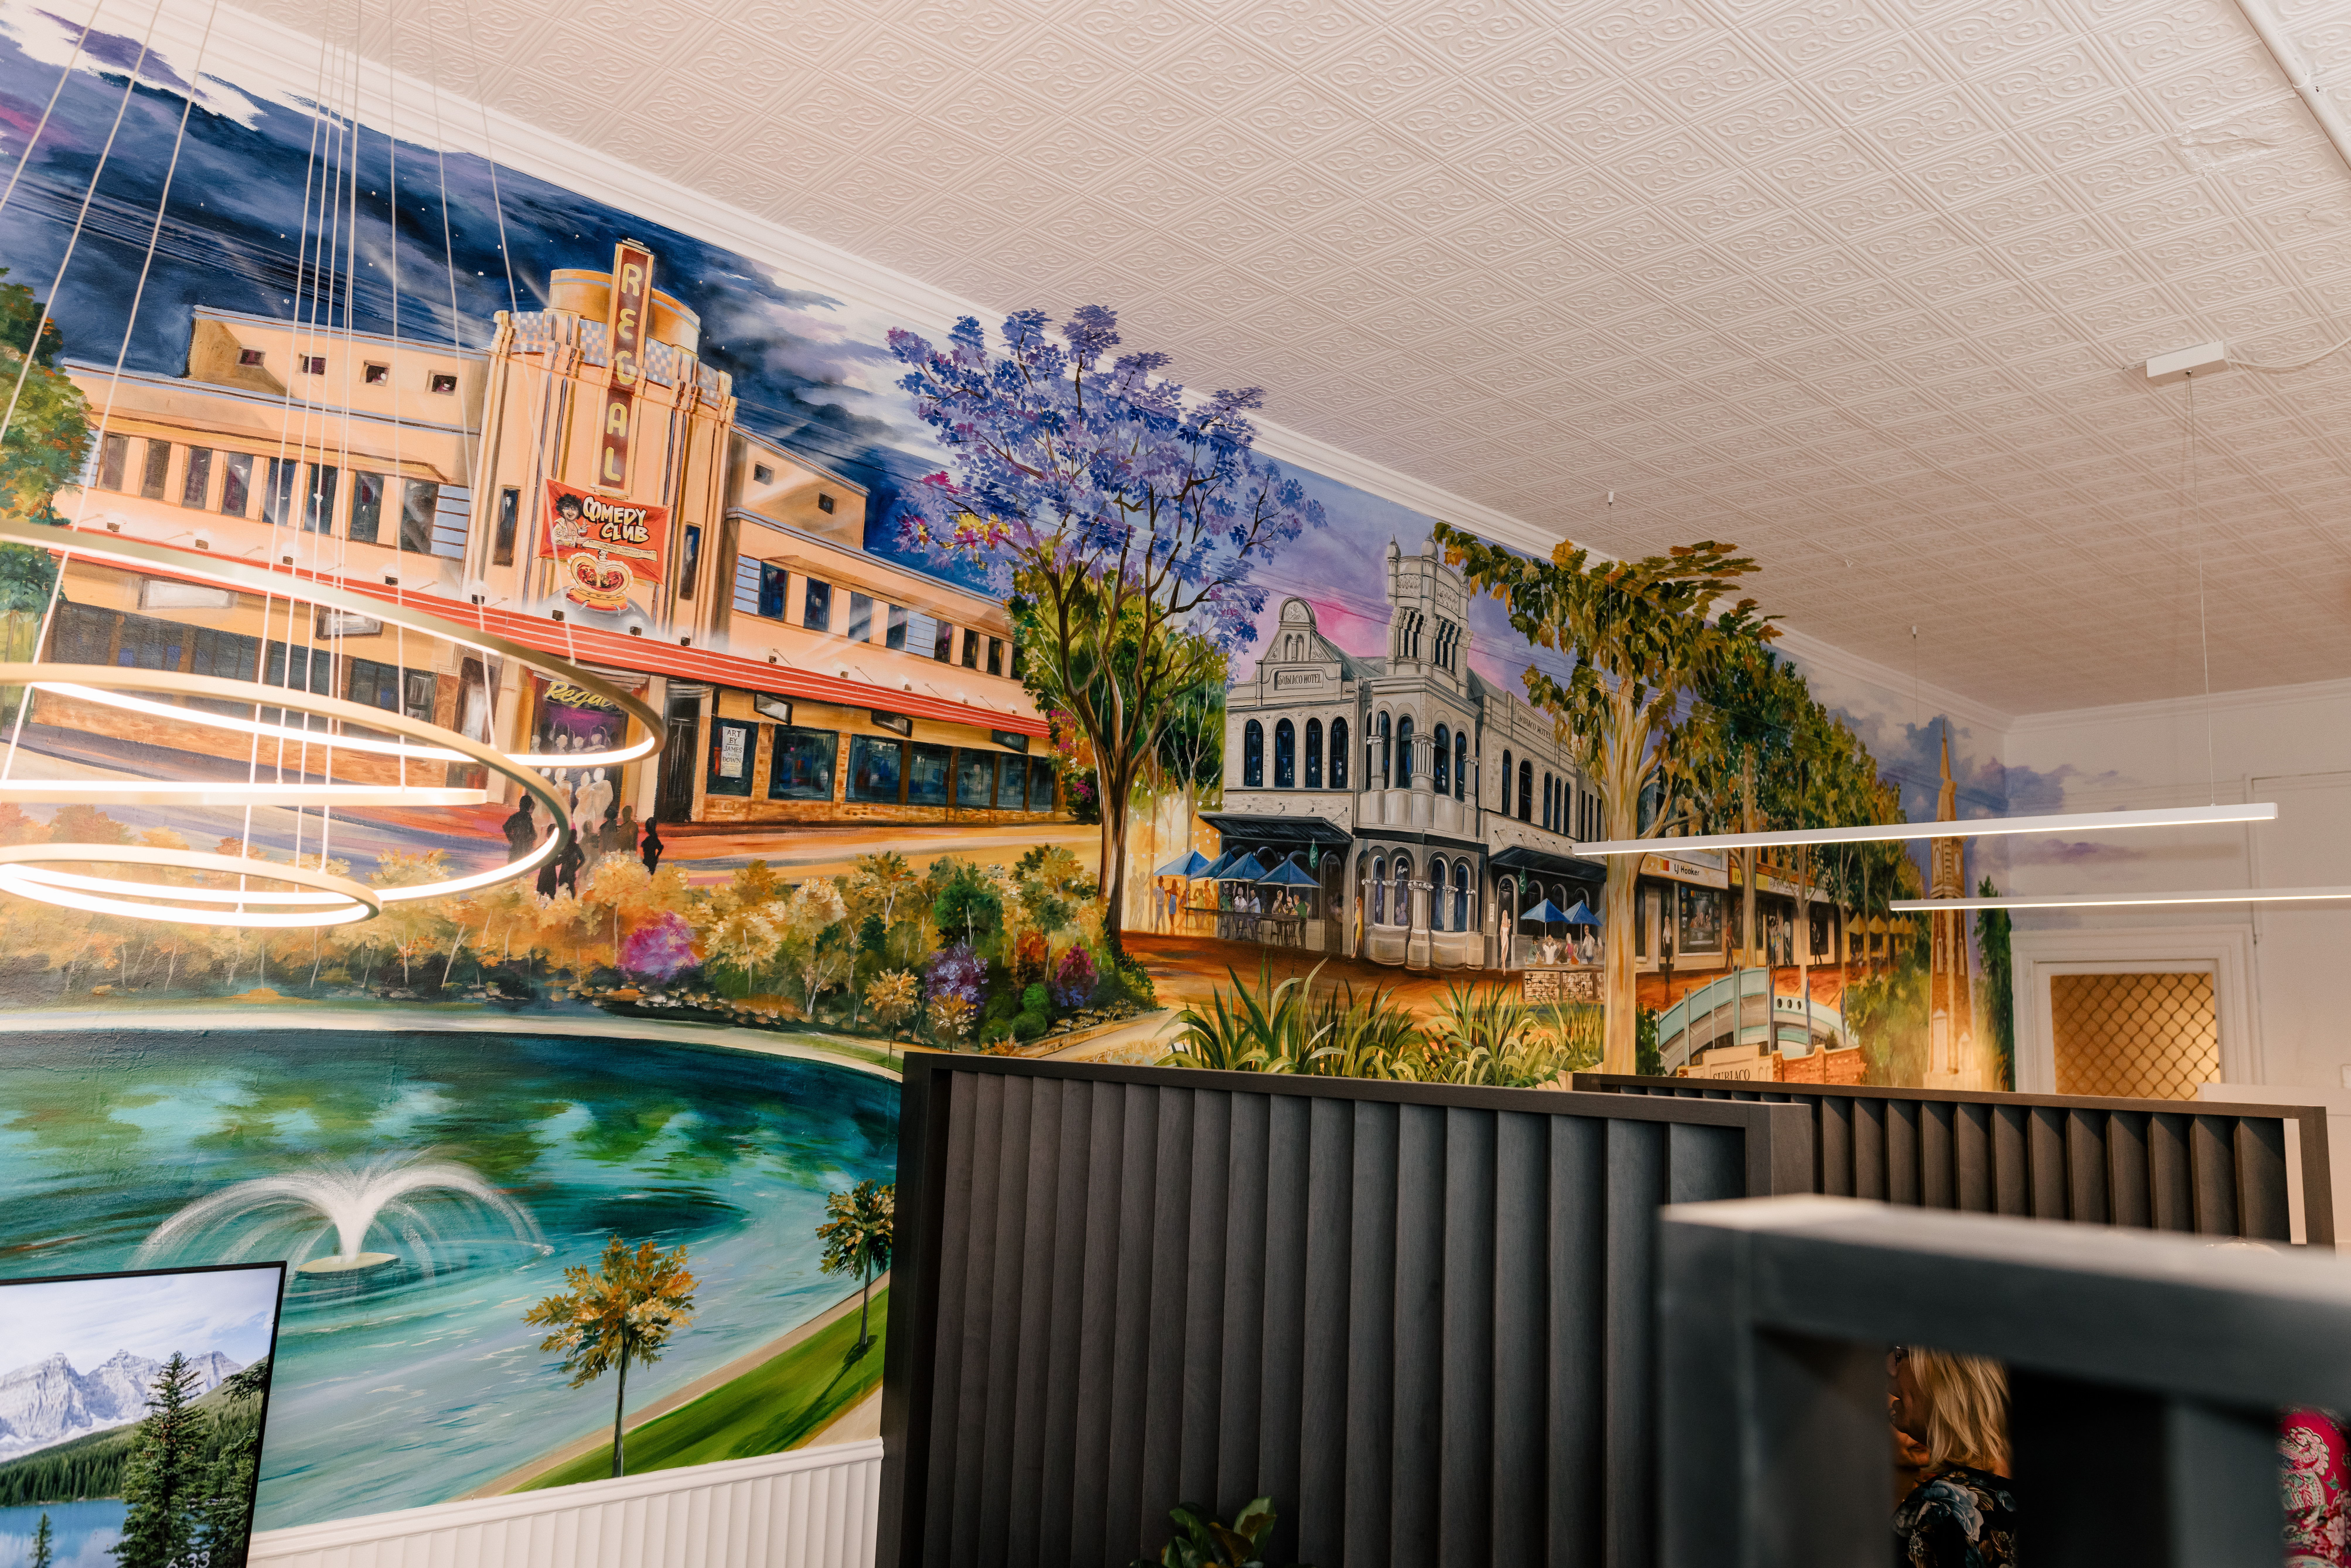 Mural of Subiaco by James Down (Artist)